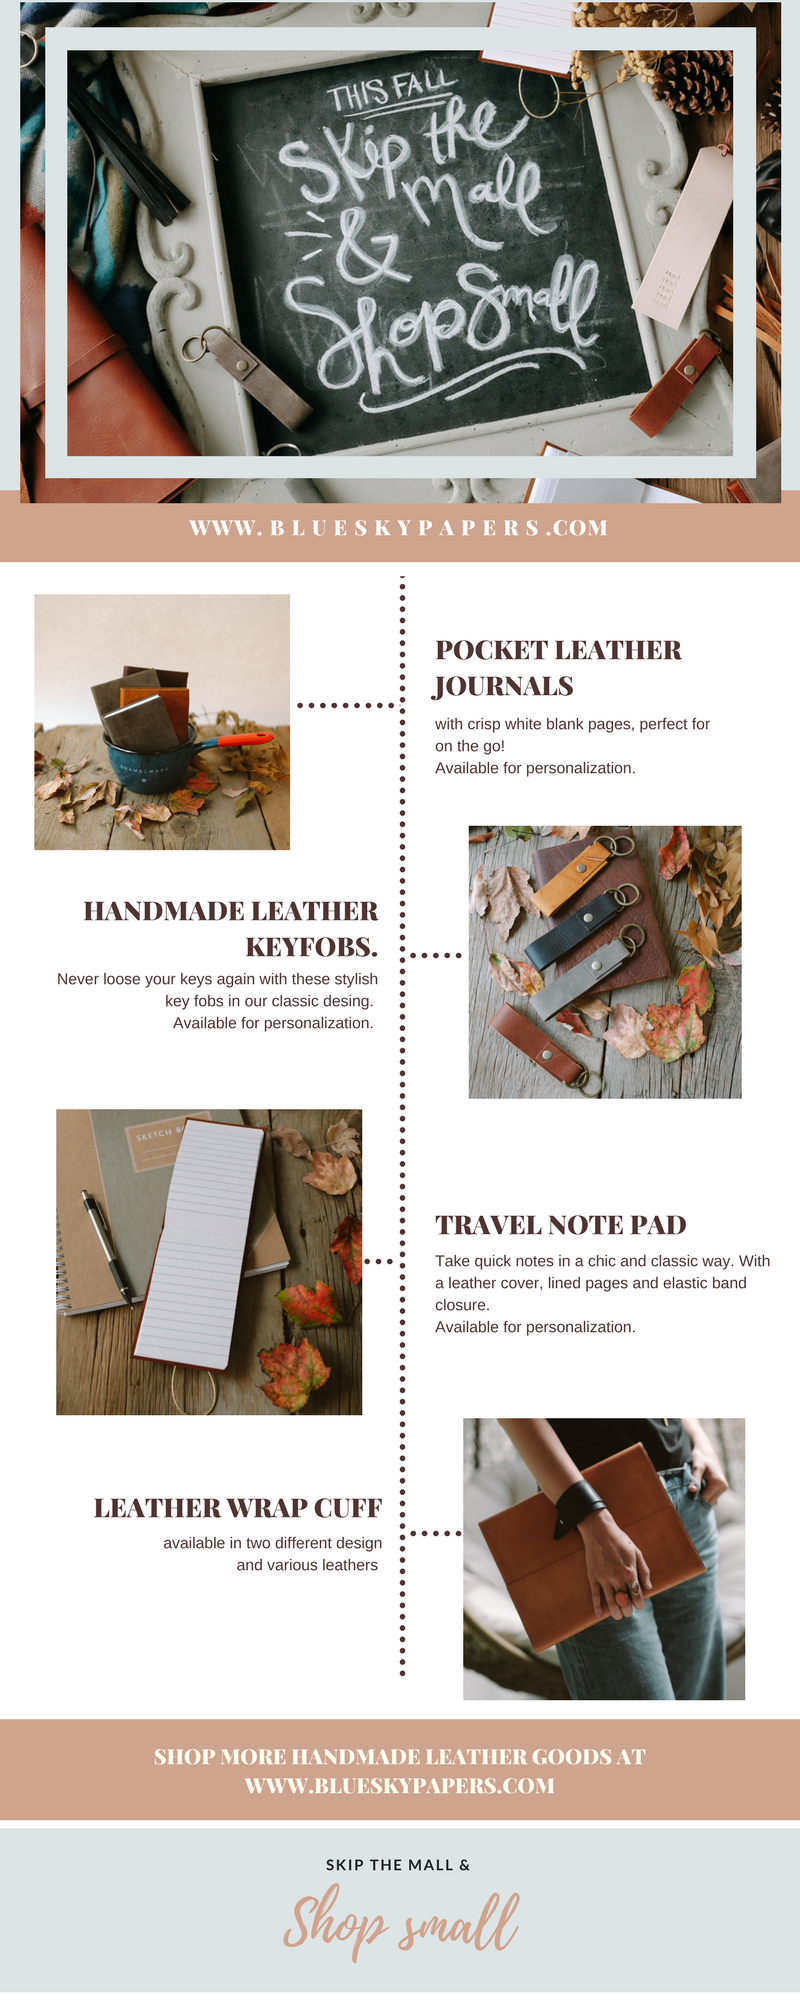 New-Leather-Handmade-Goods_Blue-Sky-Papers